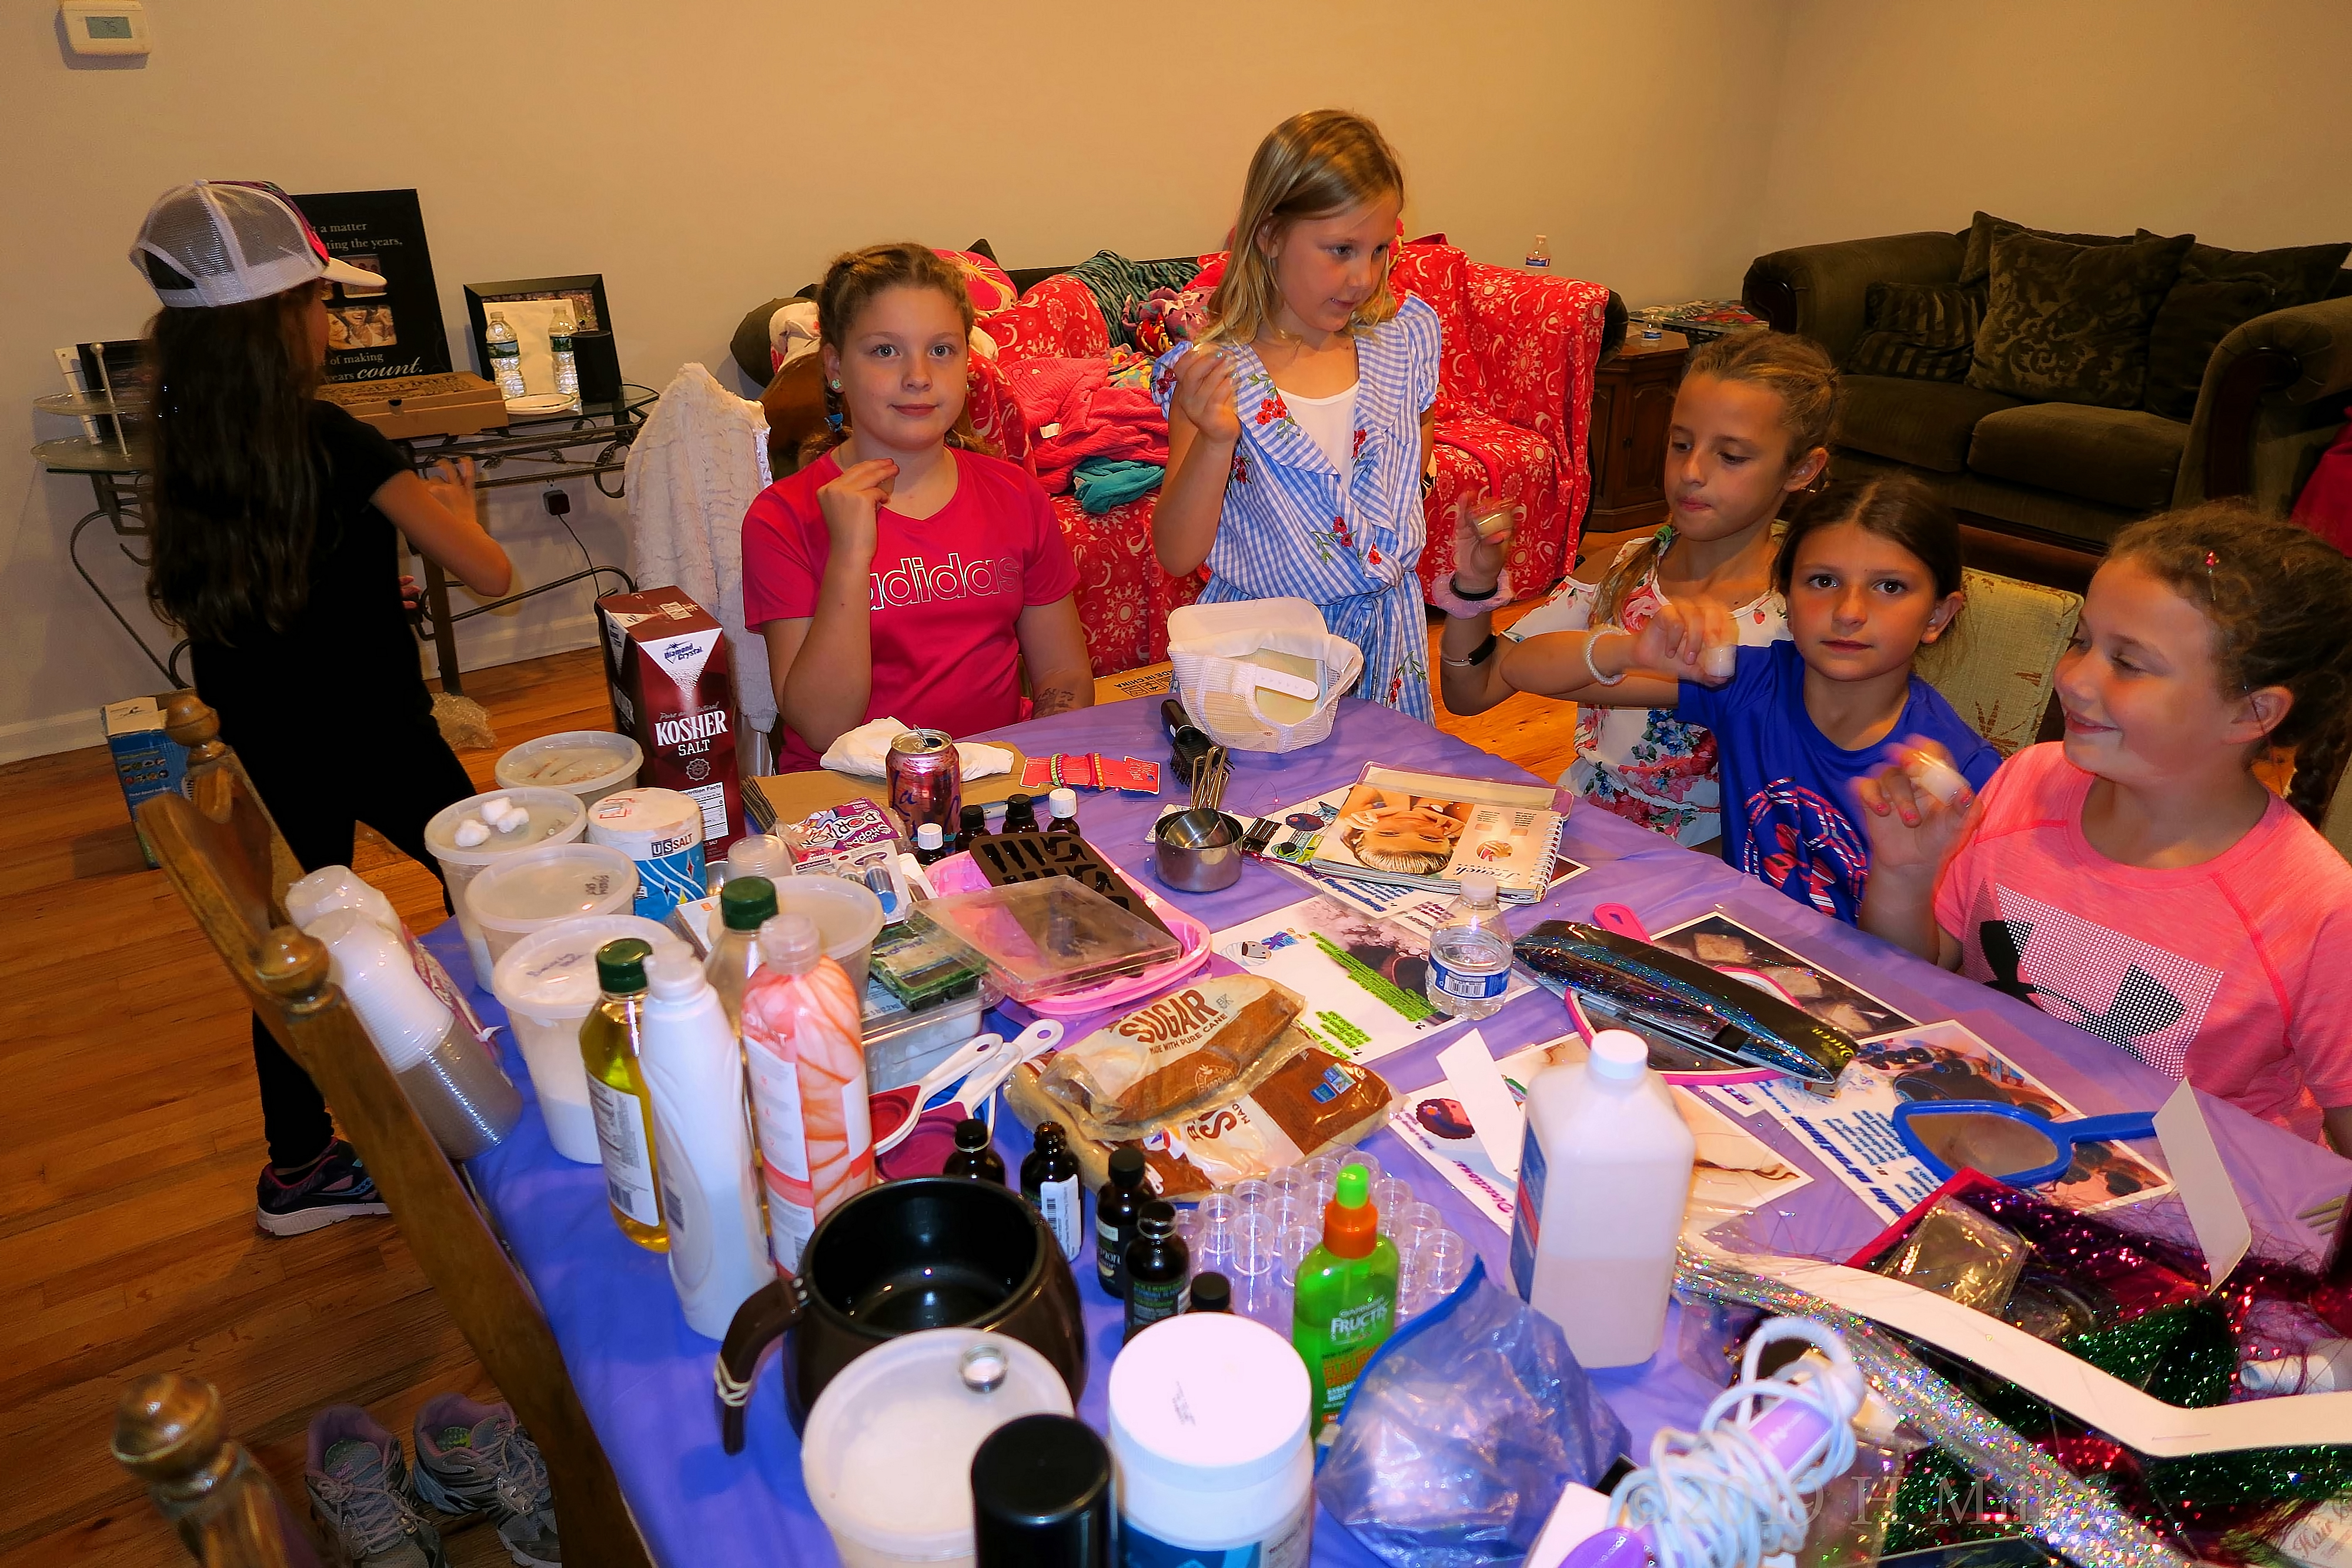 A Kids Spa Birthday Party For Siena In September 2018 In New Jersey Gallery 2 